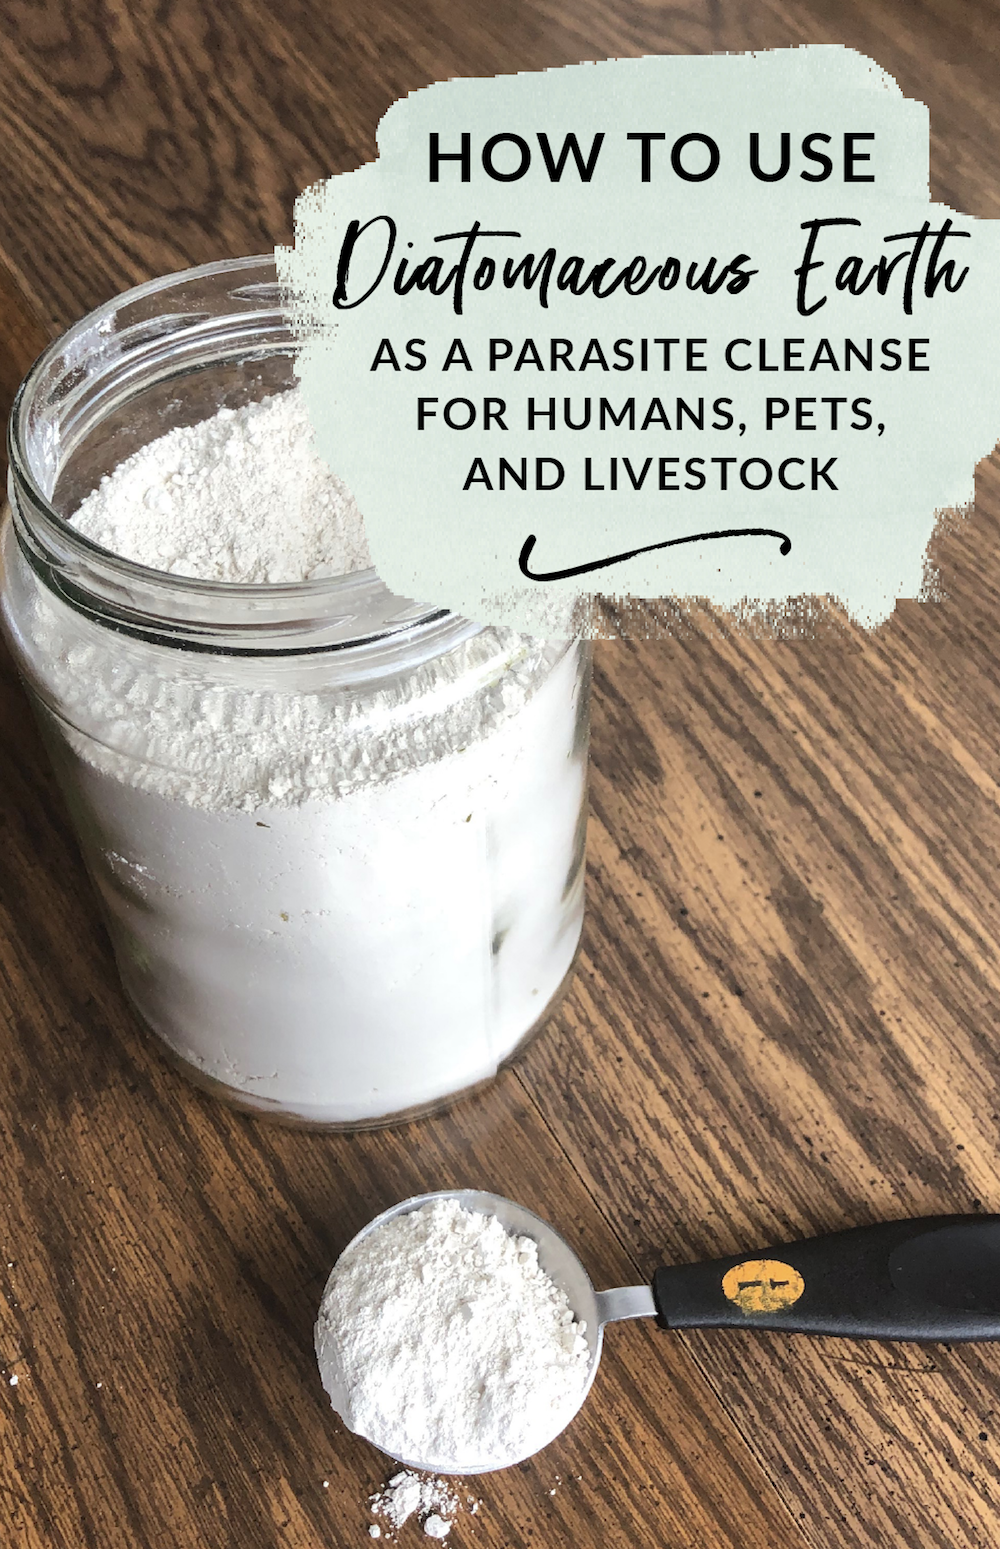 How to use Diatomaceous Earth as a Parasite Cleanse, for you, your pets, and your livestock